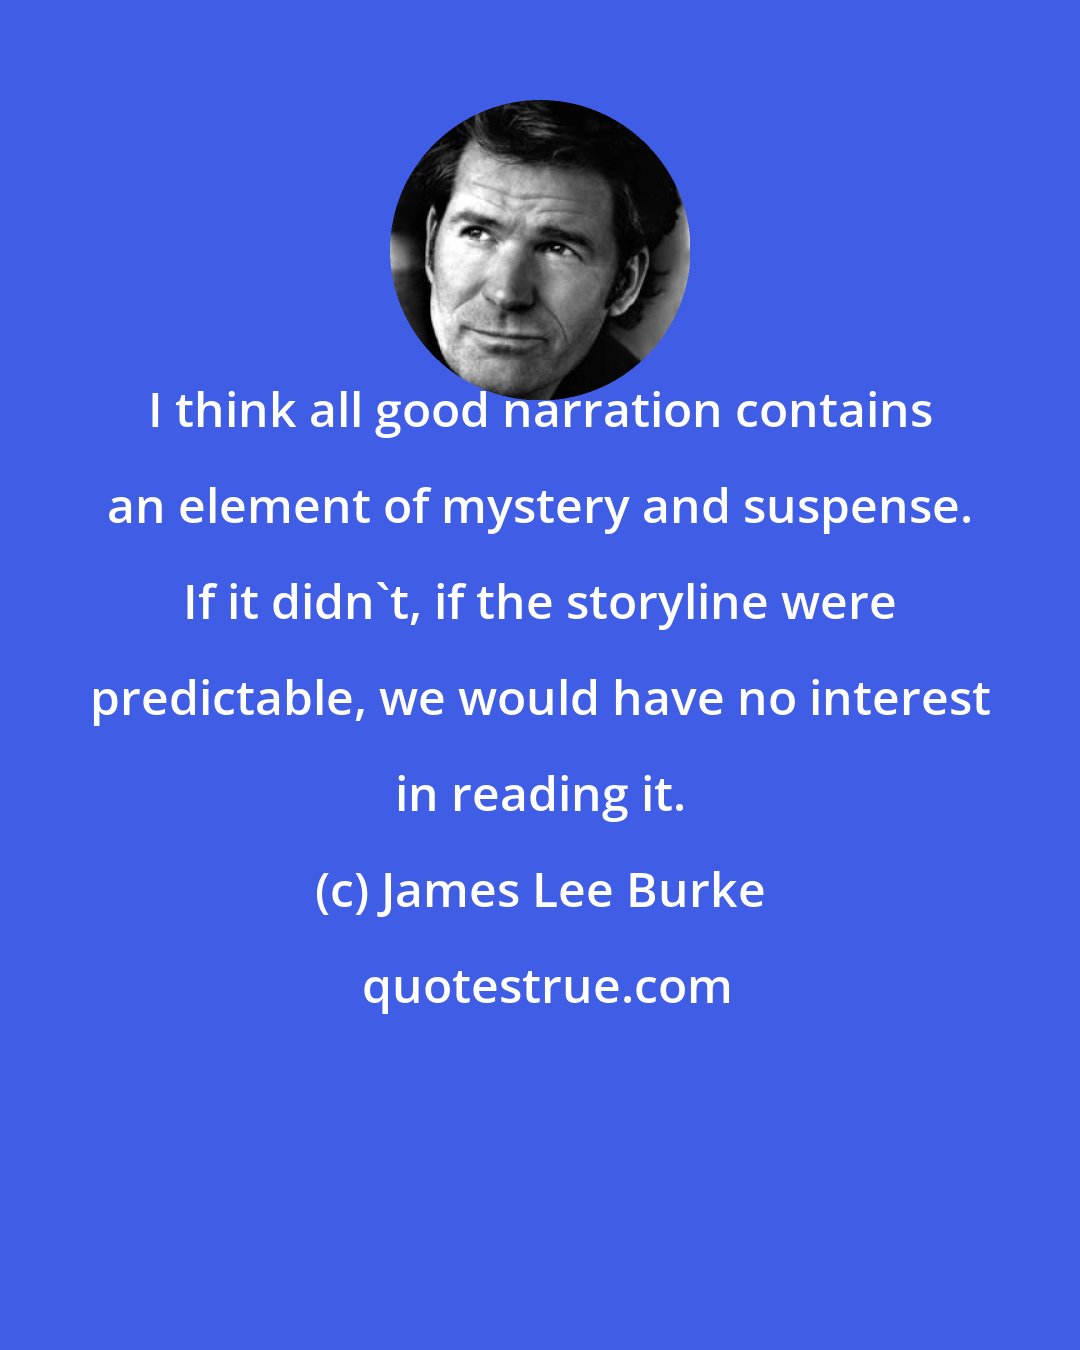 James Lee Burke: I think all good narration contains an element of mystery and suspense. If it didn't, if the storyline were predictable, we would have no interest in reading it.